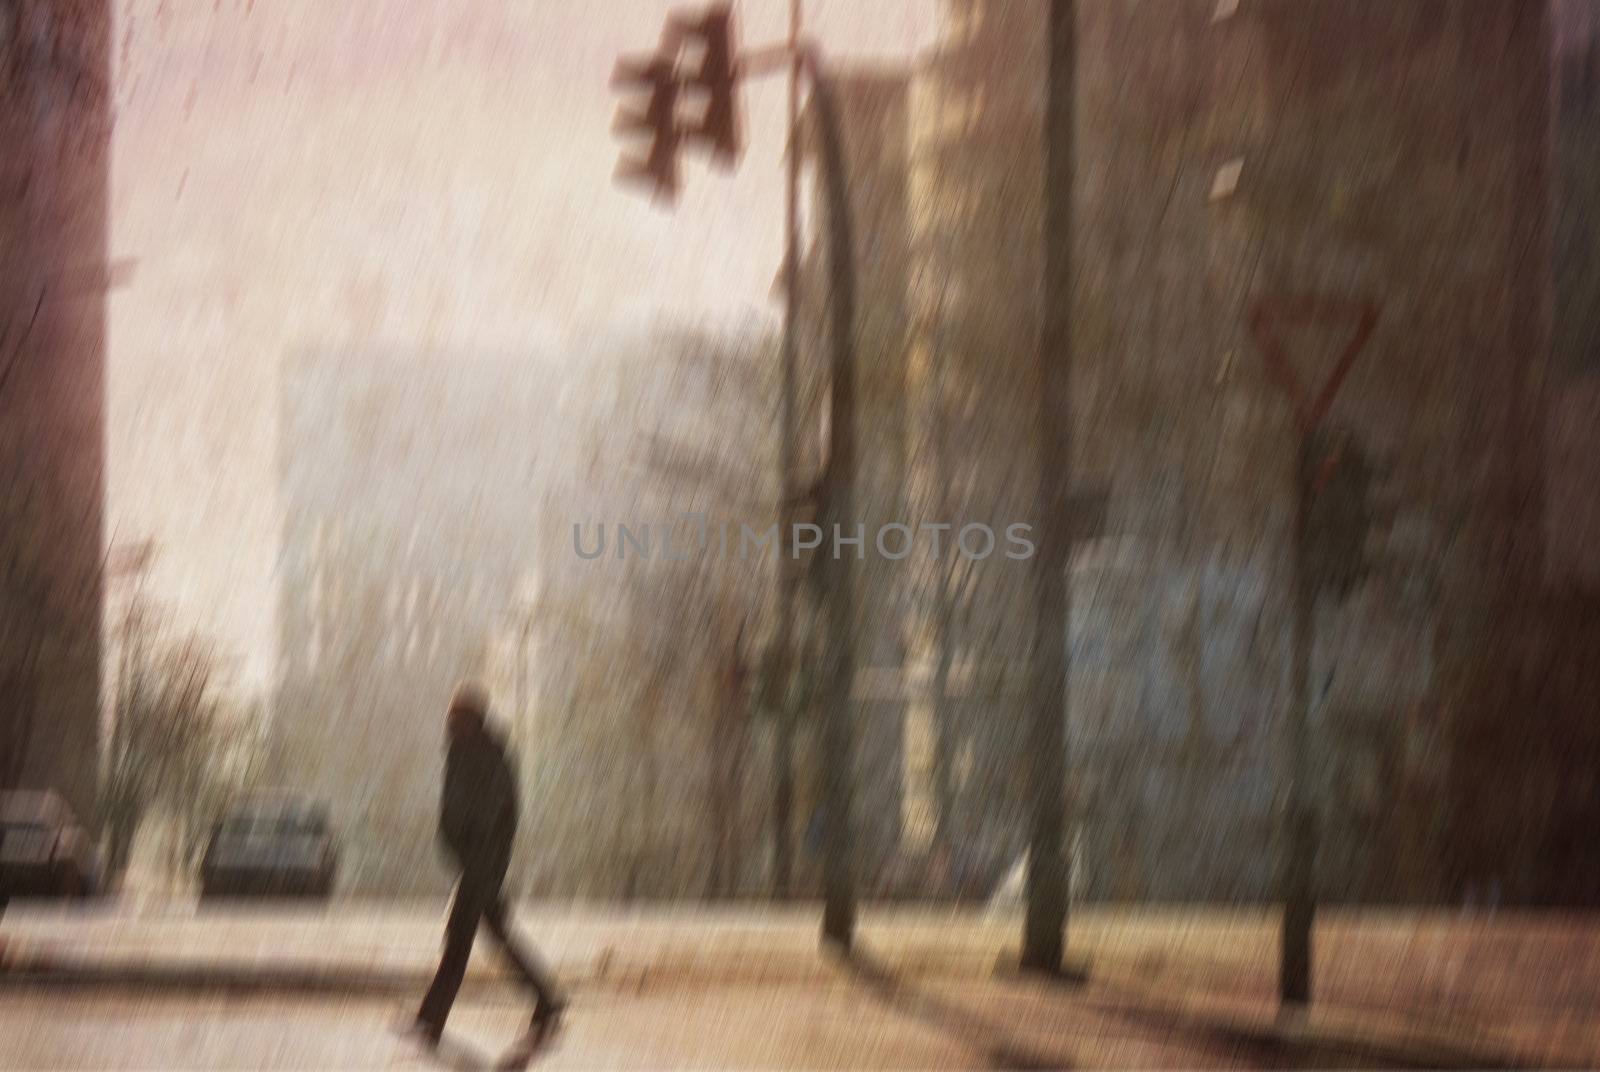 Lonely morning walk. Several of my photos worked together to make a retro dreamlike look.